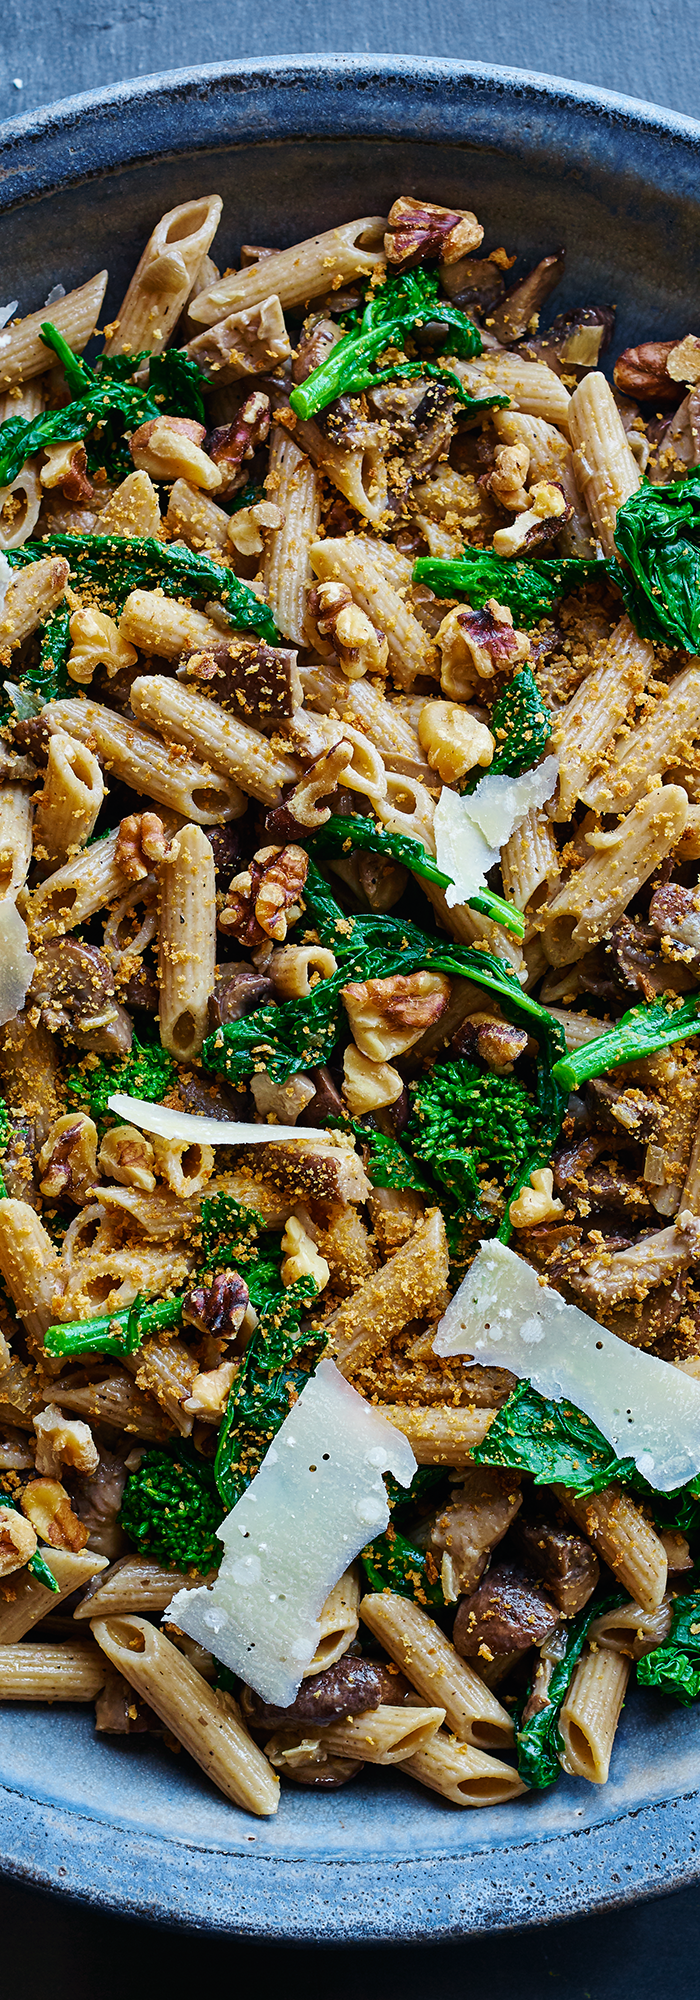 Penne Pasta with Broccoli Rabe and Mushrooms